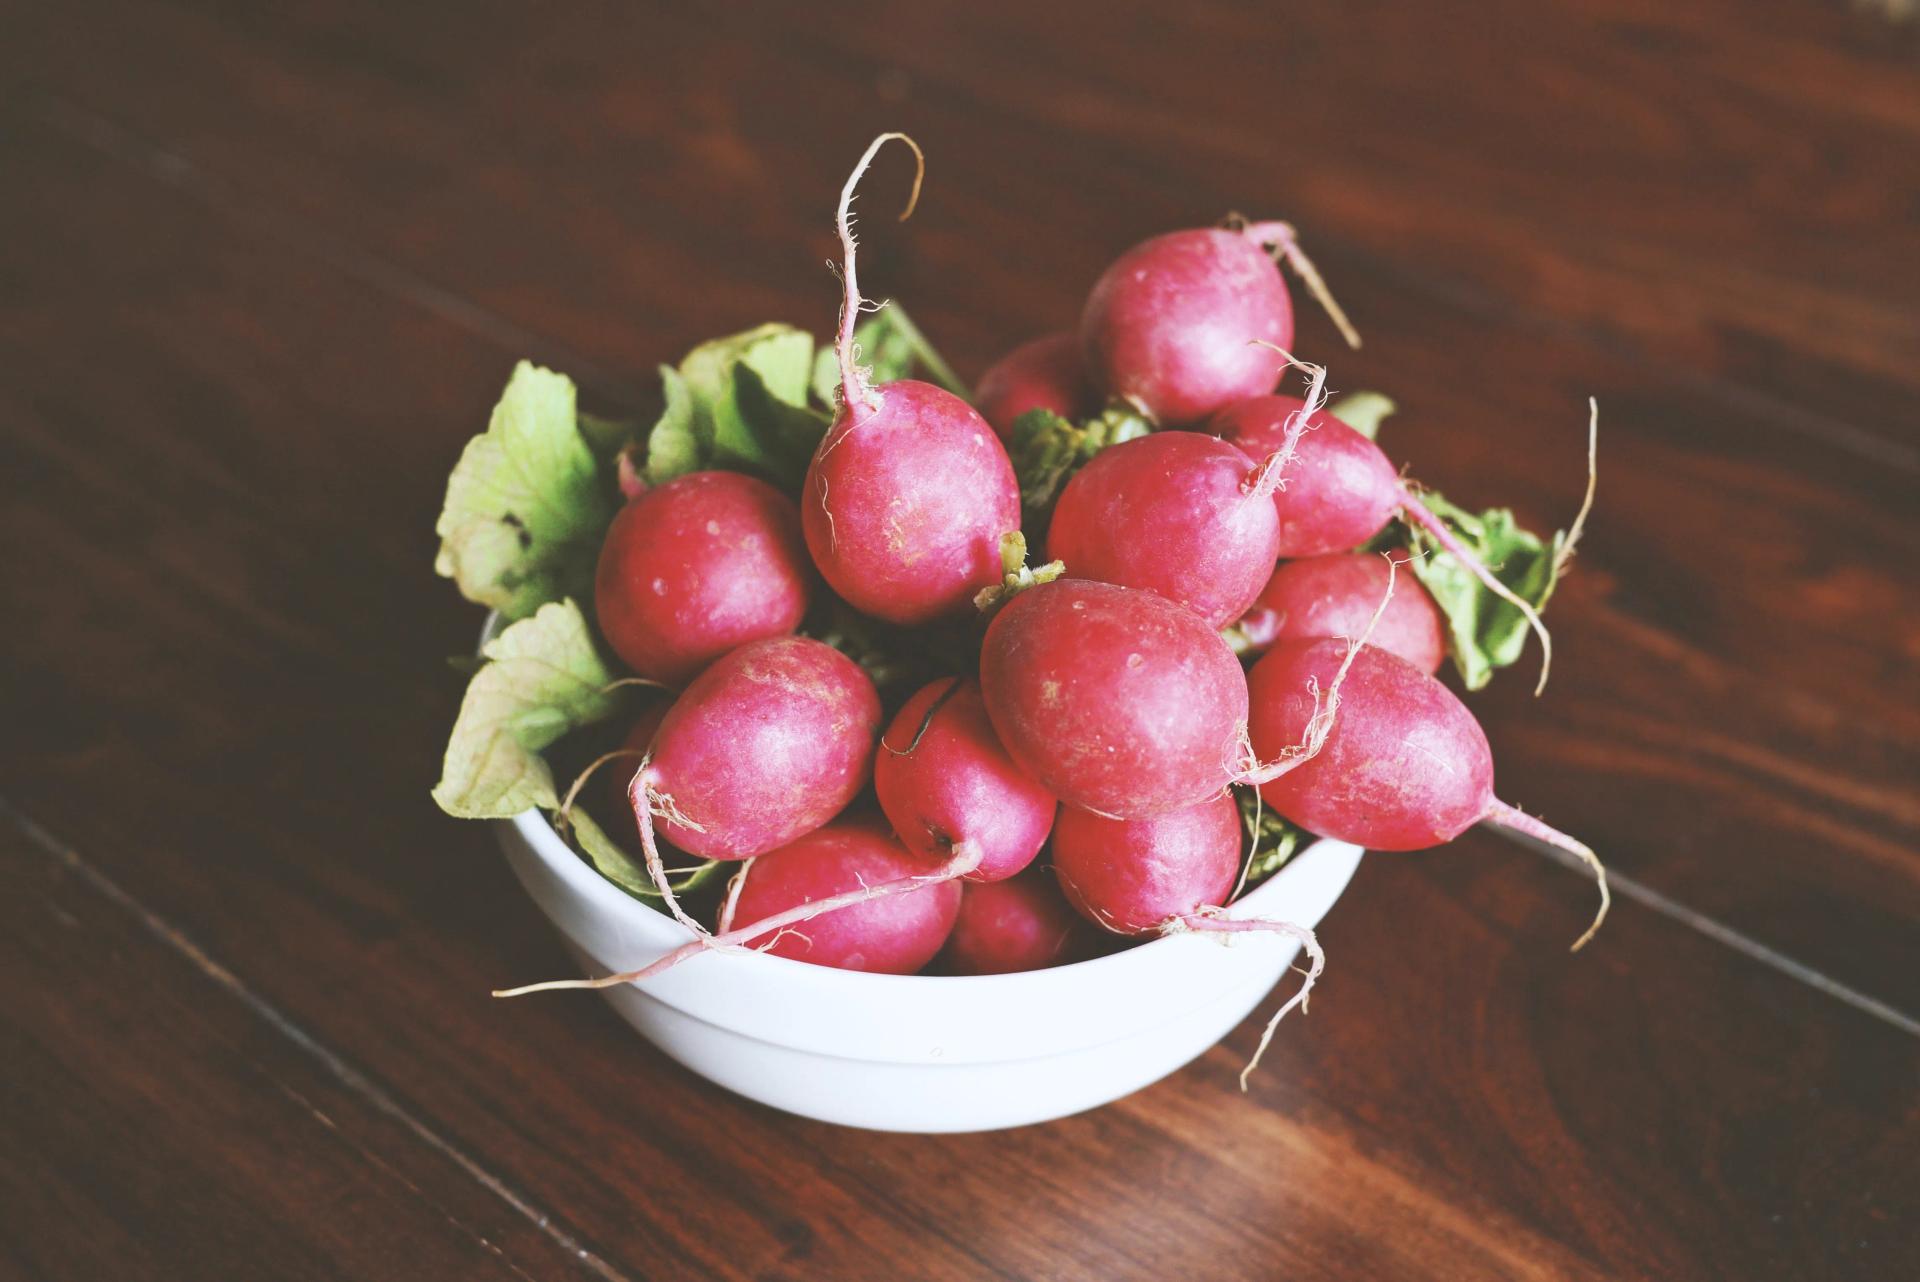 Radishes in the Bowl